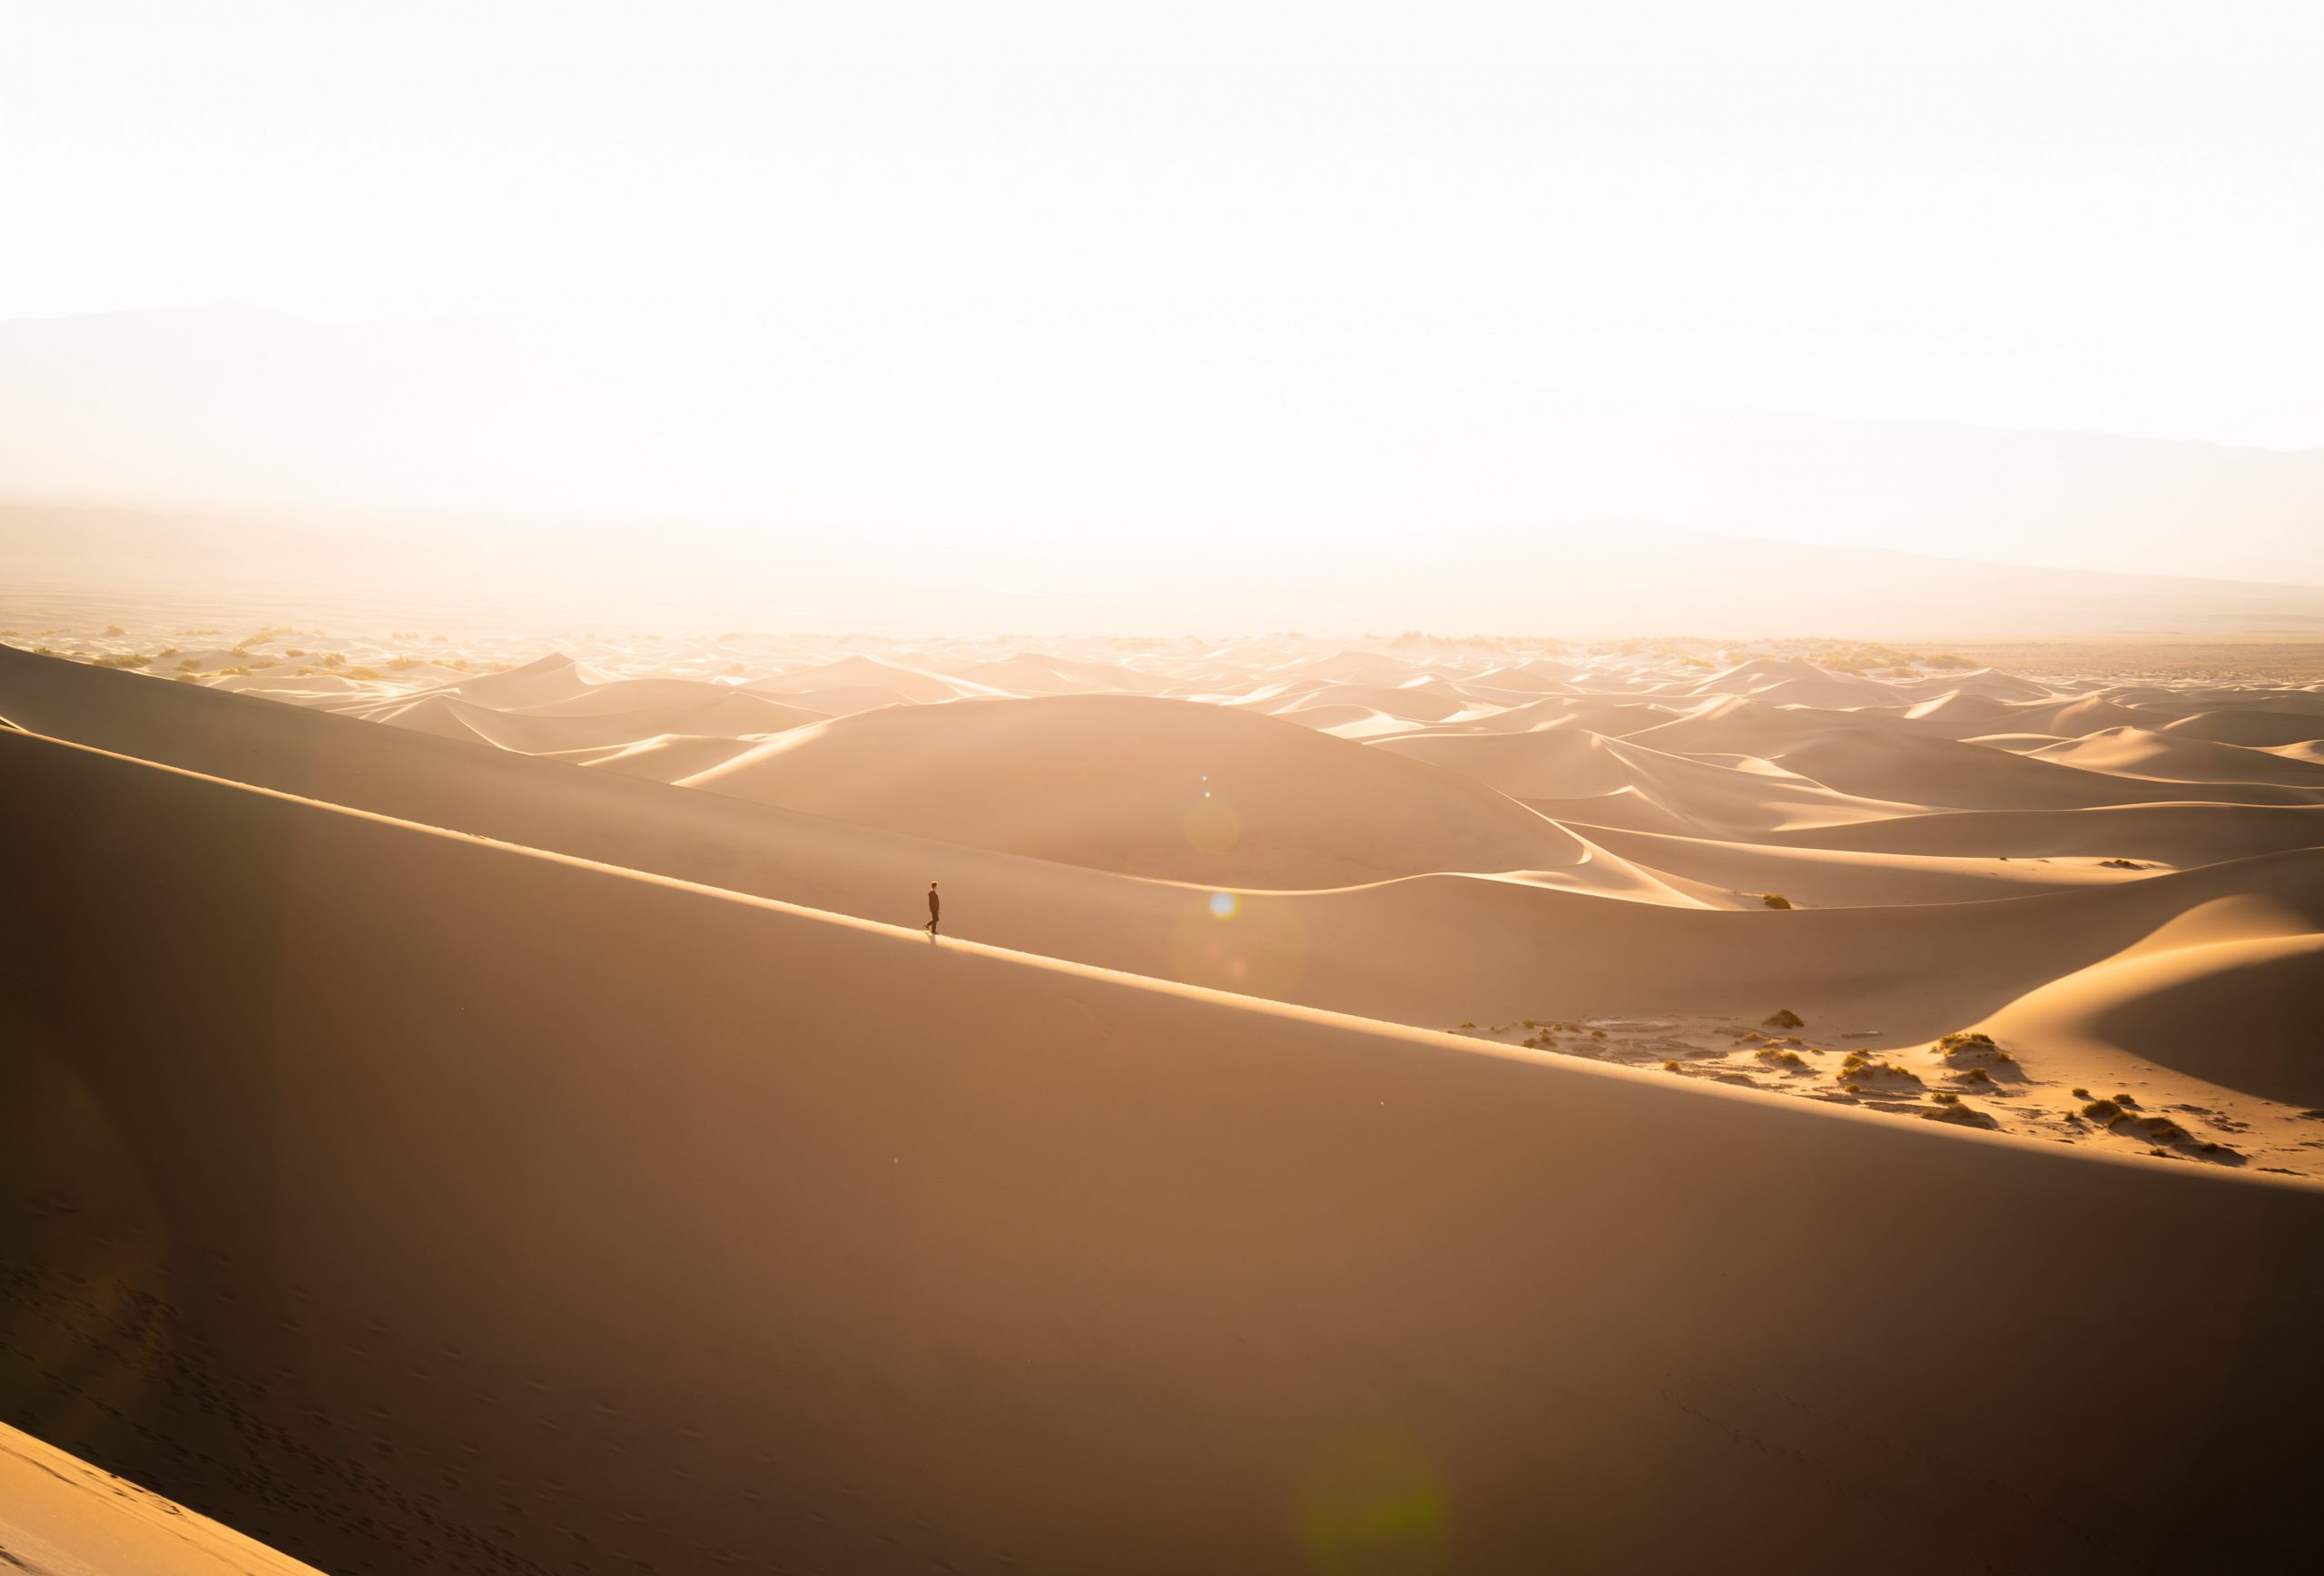 in the distance a man stands alone among desert hills